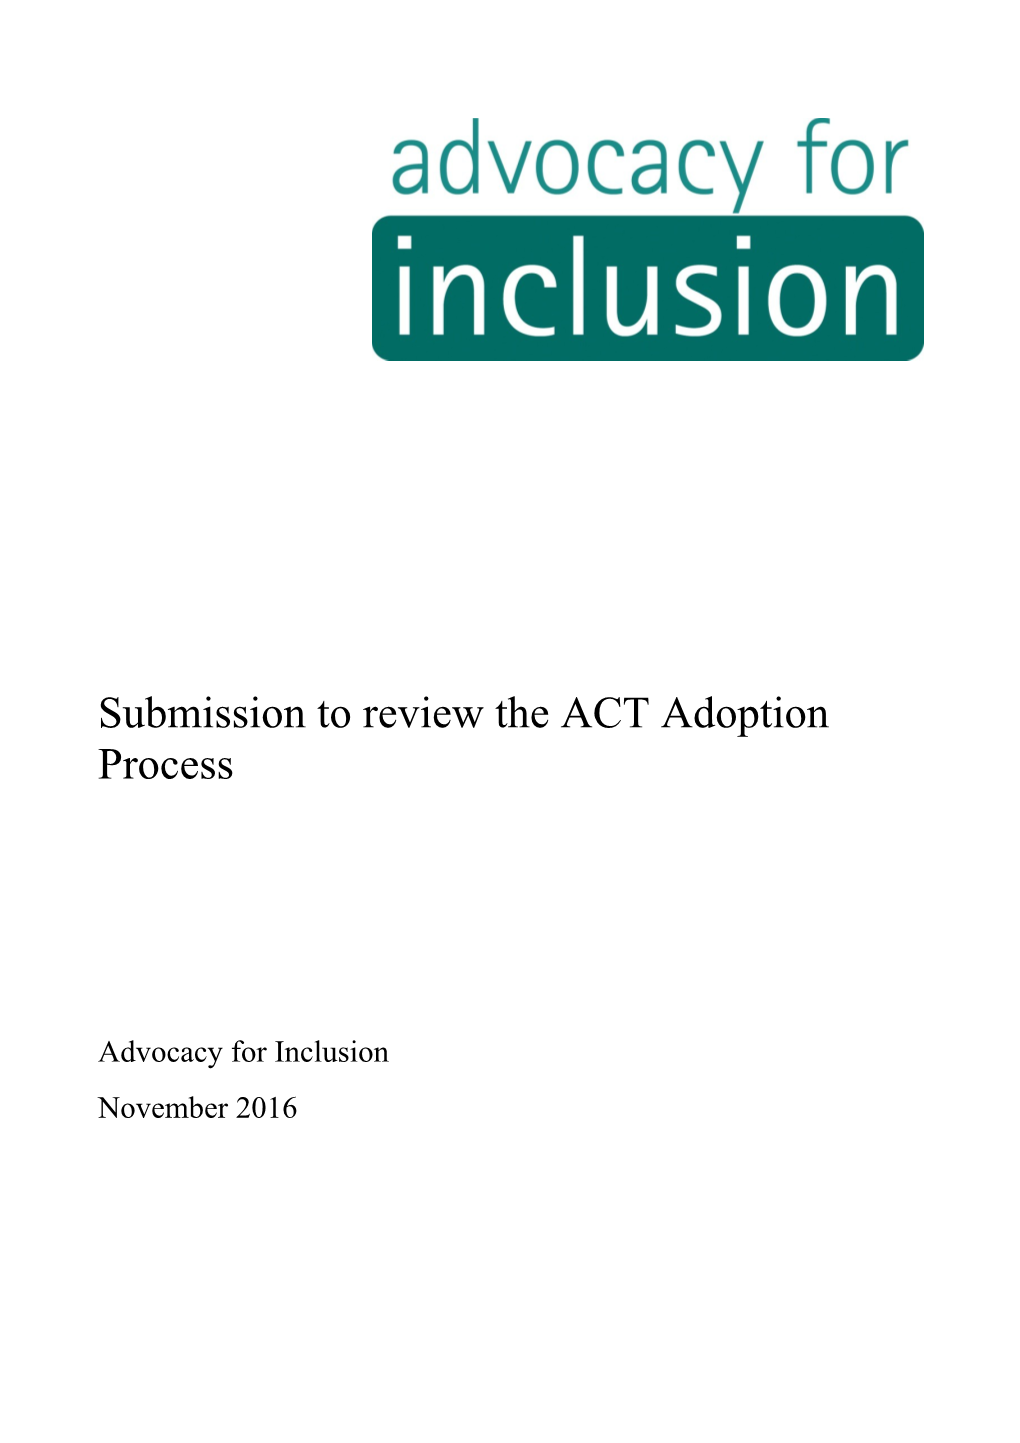 Submission to Review the ACT Adoption Process